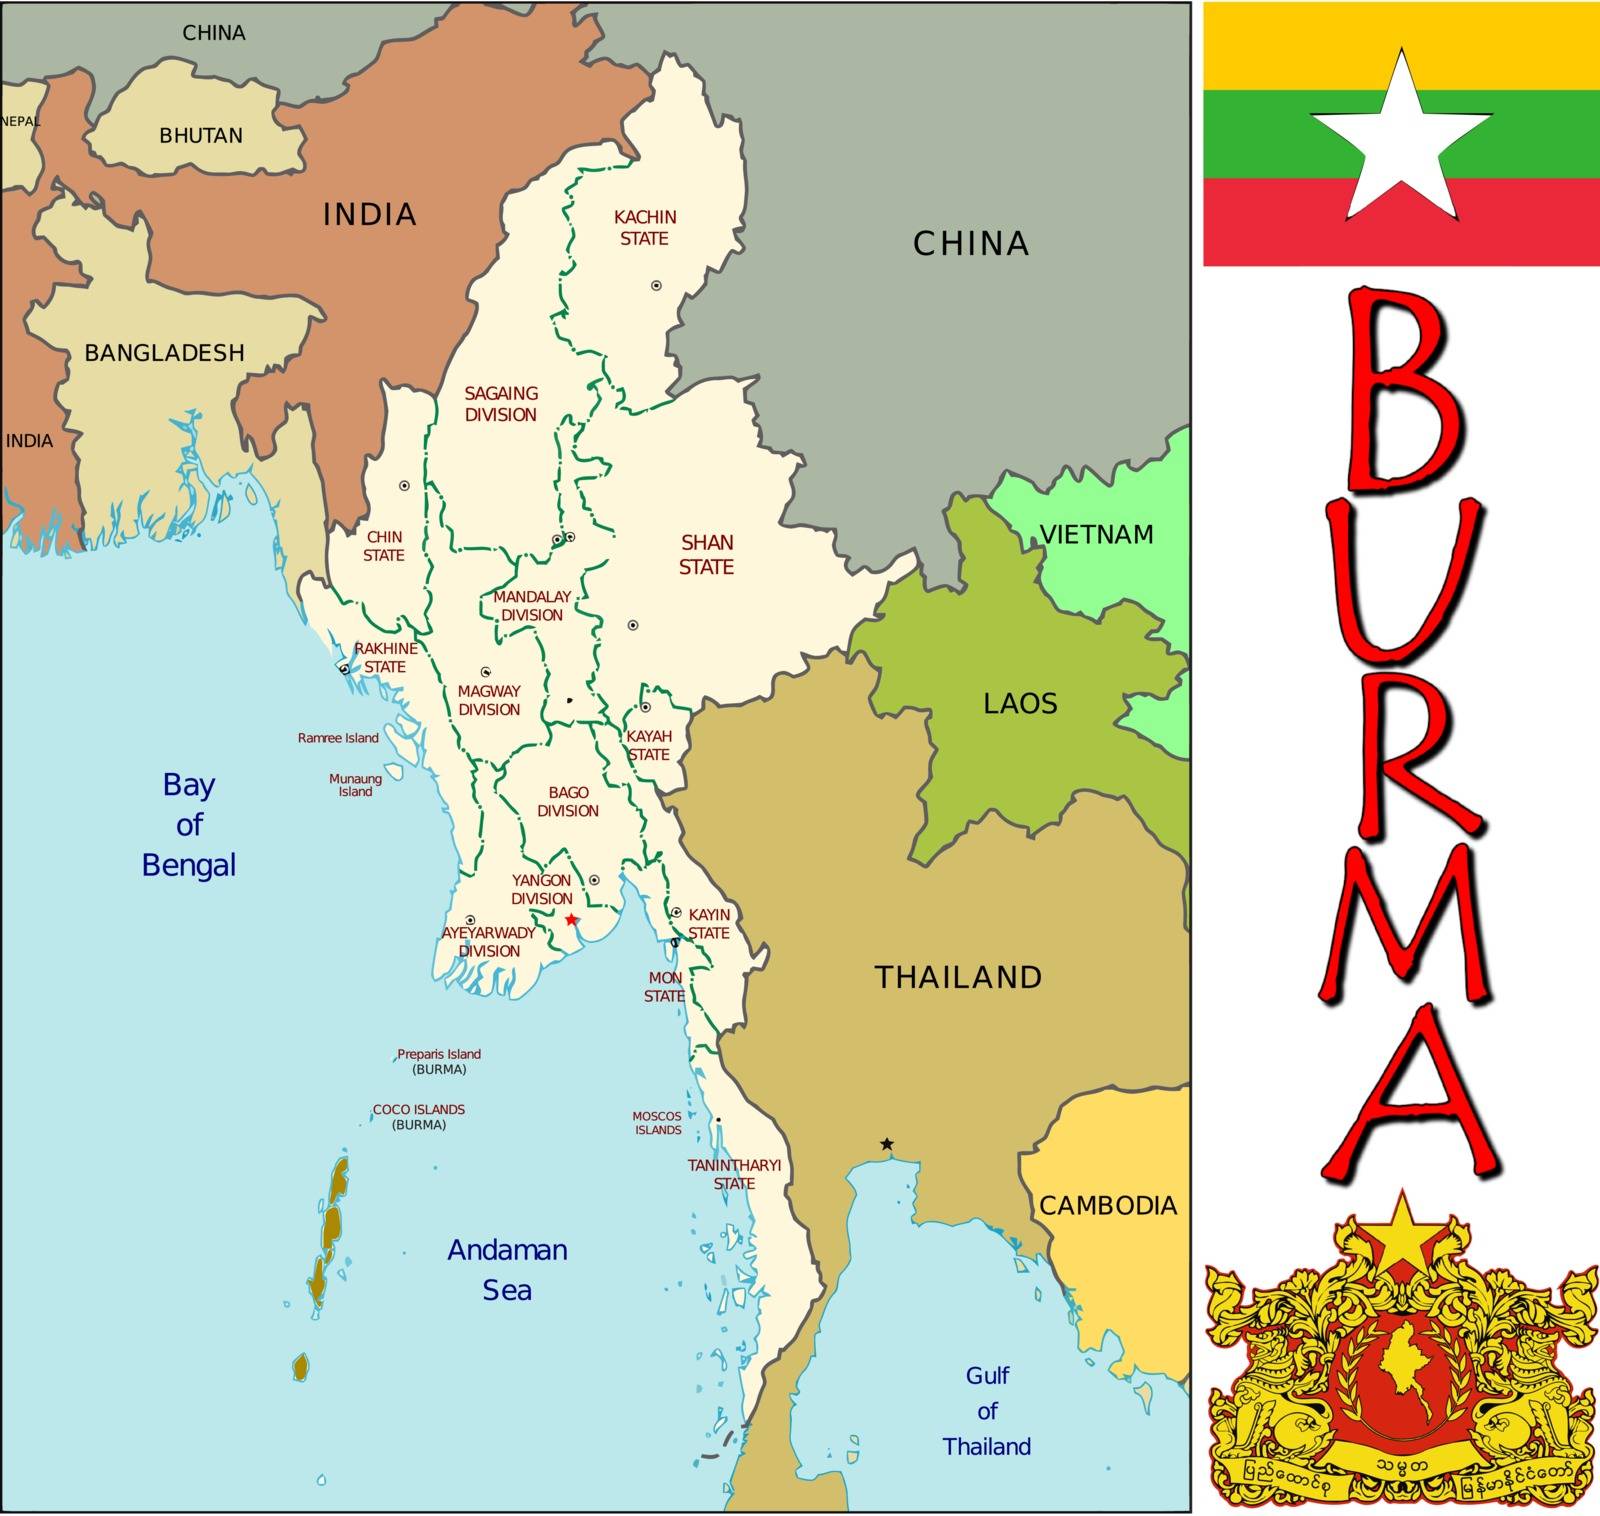 Burma divisions by JRTBurr